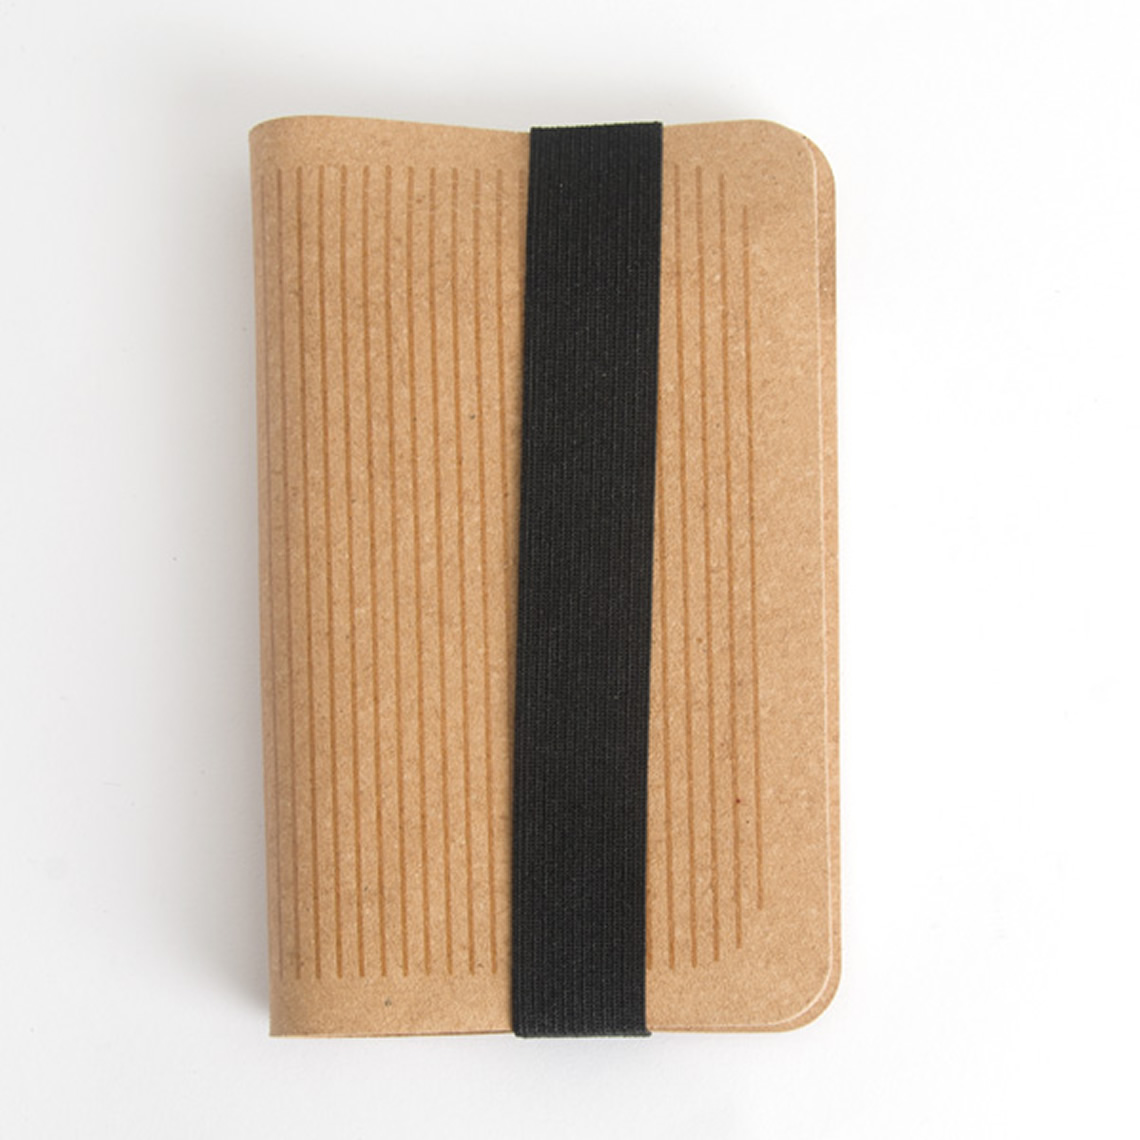 Rivskin - recycled paper and recycled leather notepad by Arbos